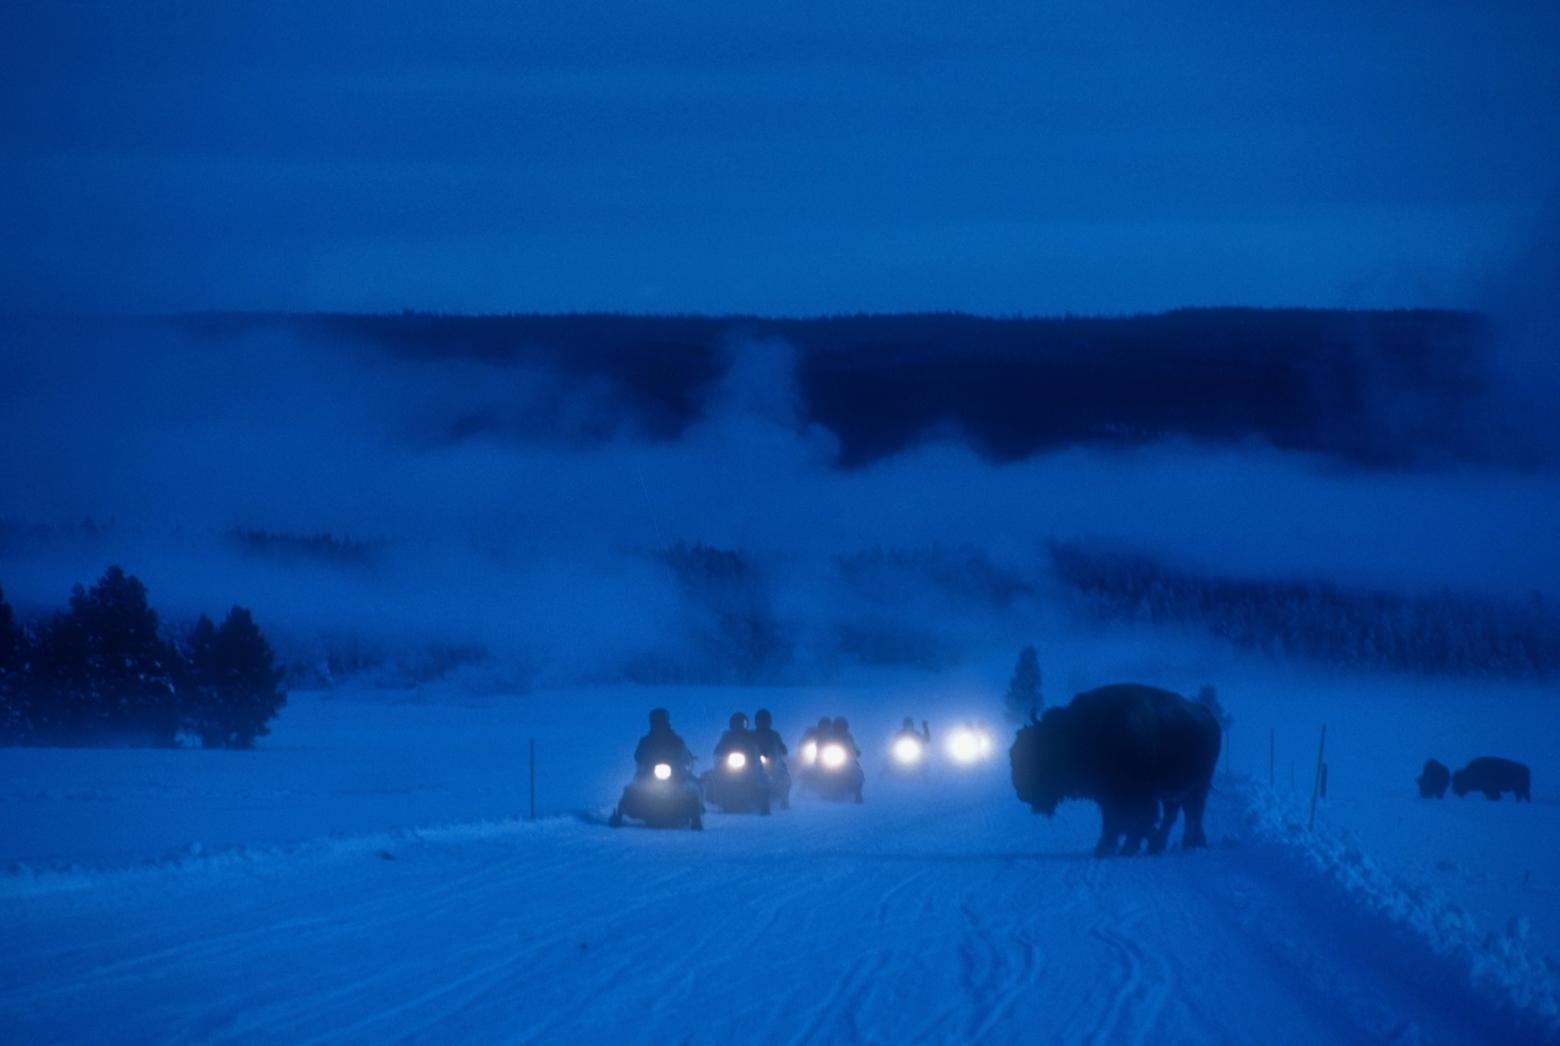 Nightfall in Yellowstone as fleet of snowmobilers try to find their way home. All photos by Steven Fuller